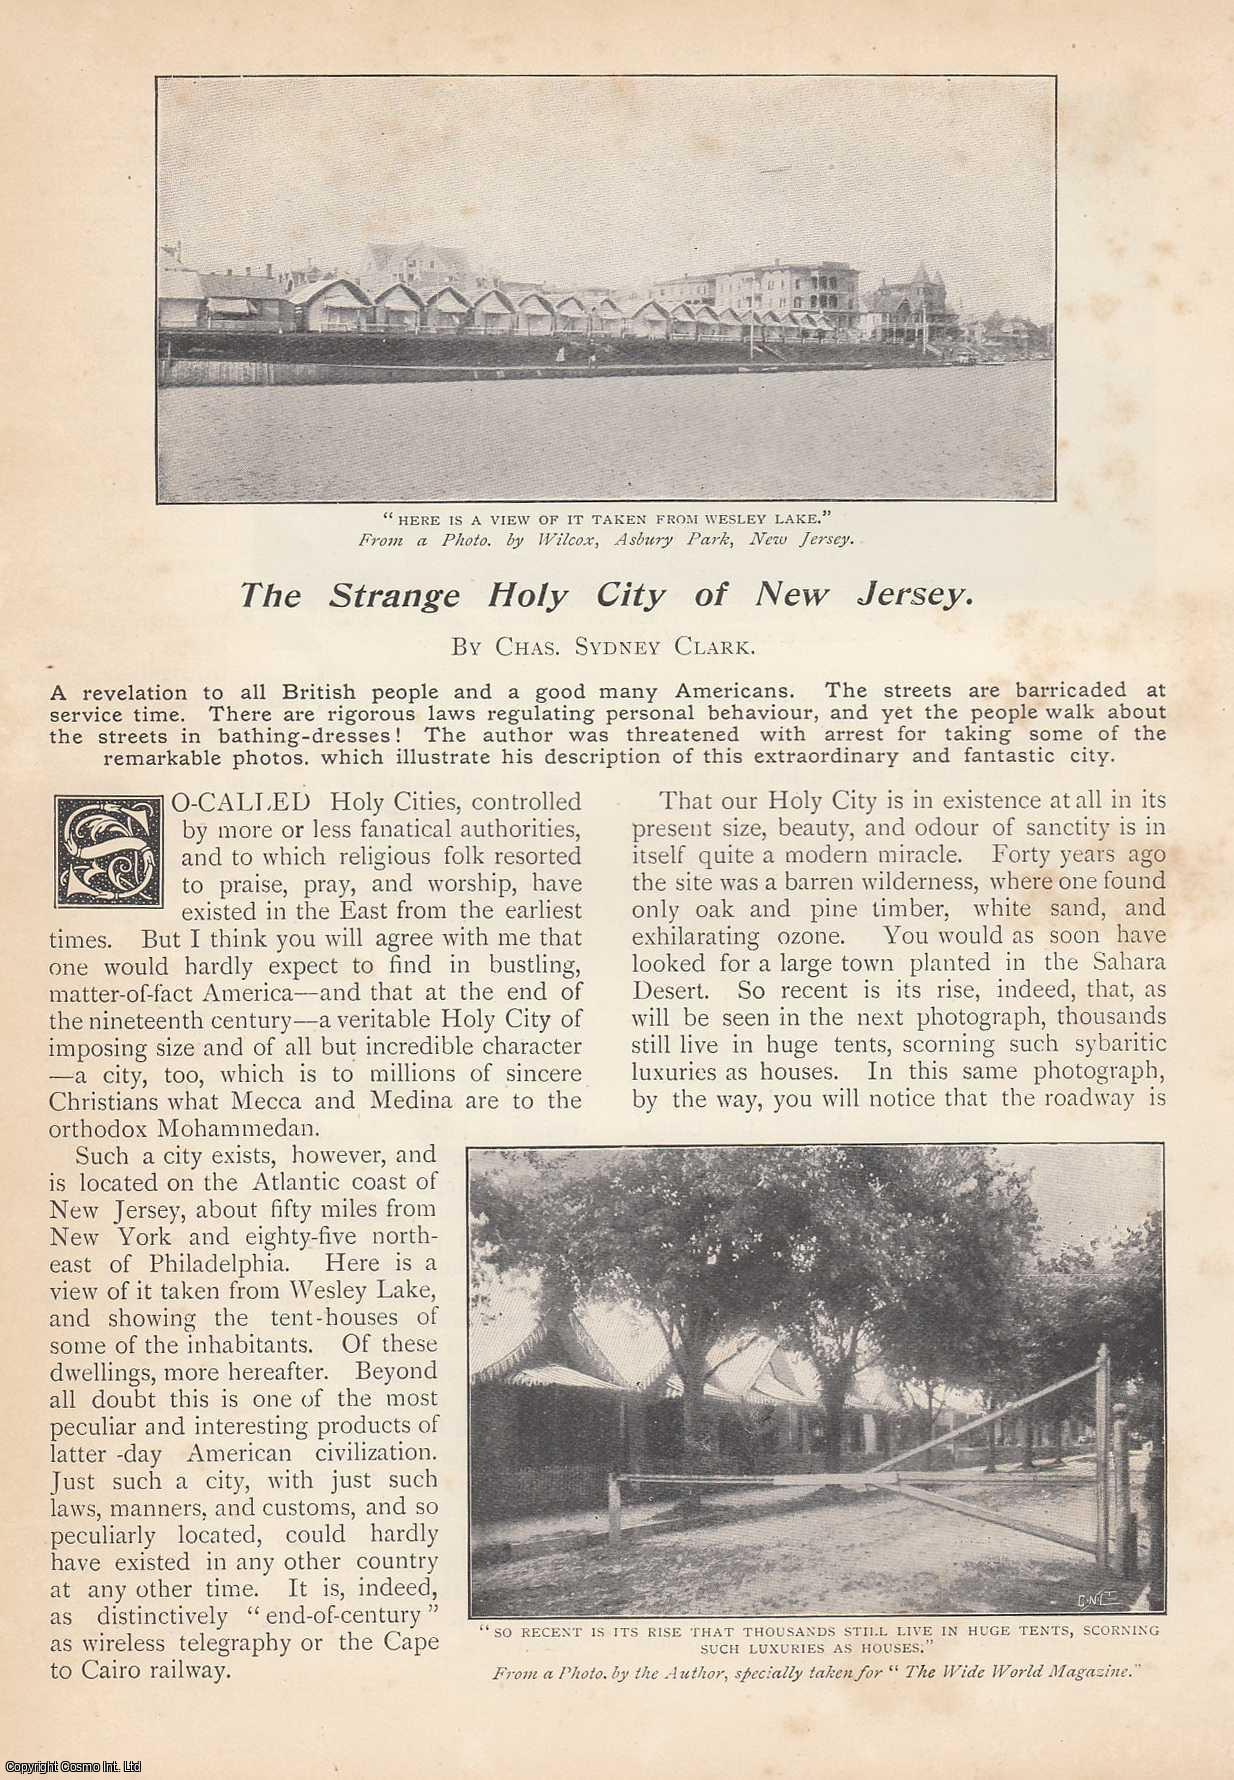 Chas. Sydney Clark - The Strange Holy City of New Jersey. An uncommon original article from the Wide World Magazine, 1900.